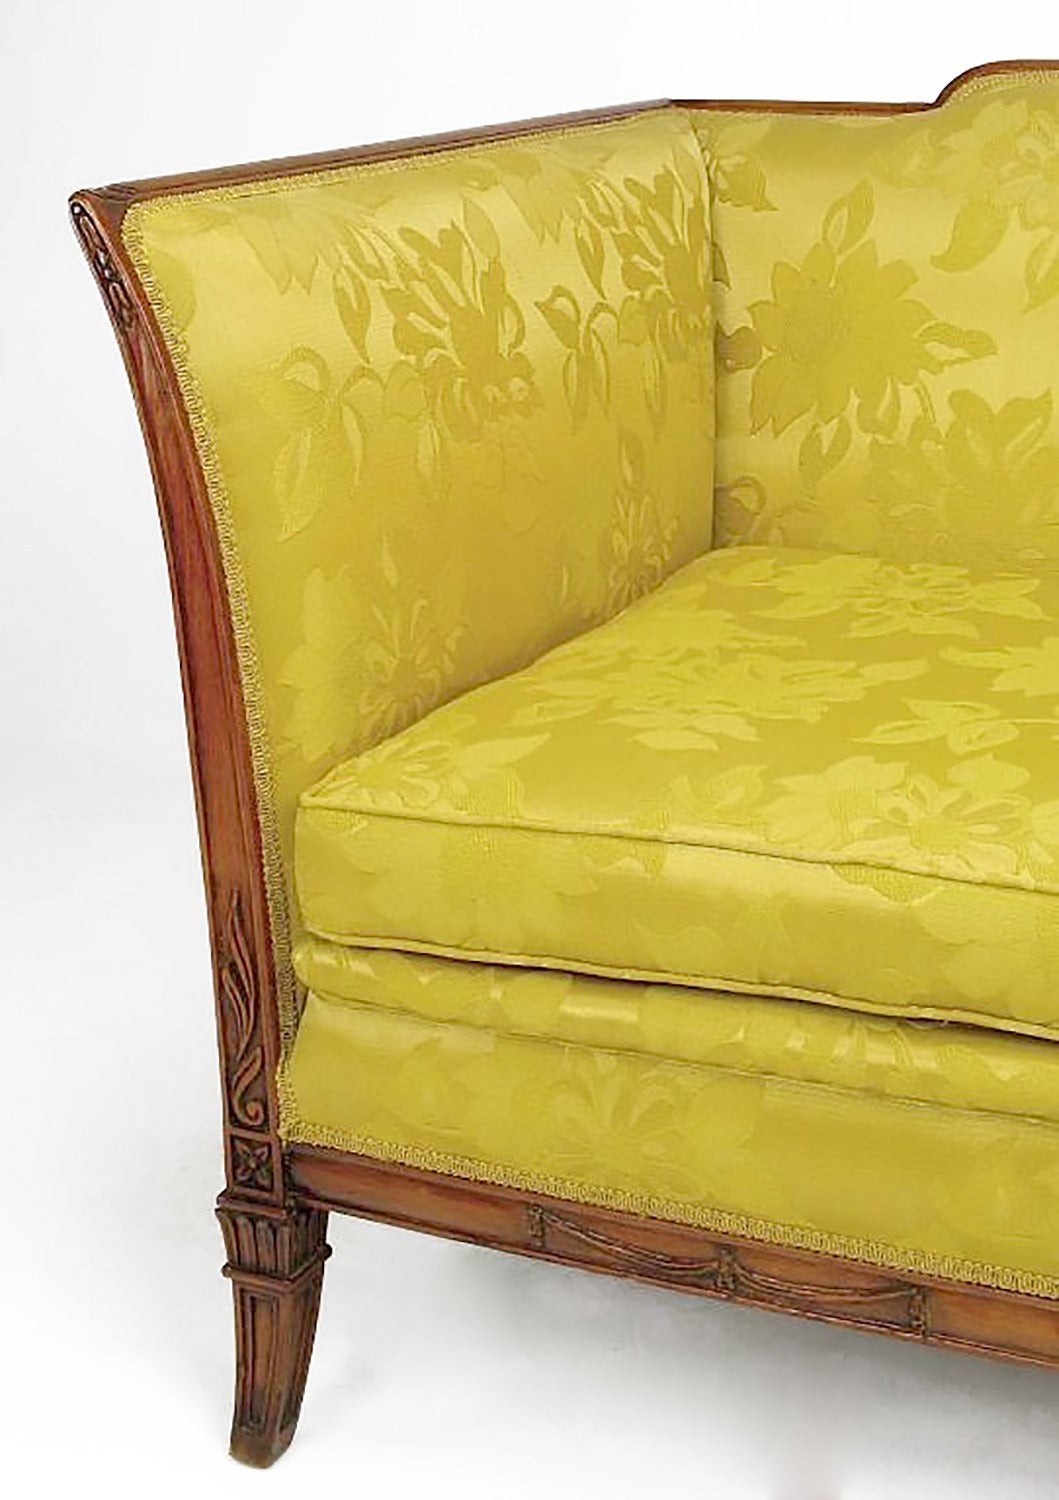 Upholstery 1940s Empire Three-Seat Sofa in Gold Damask and Carved Walnut